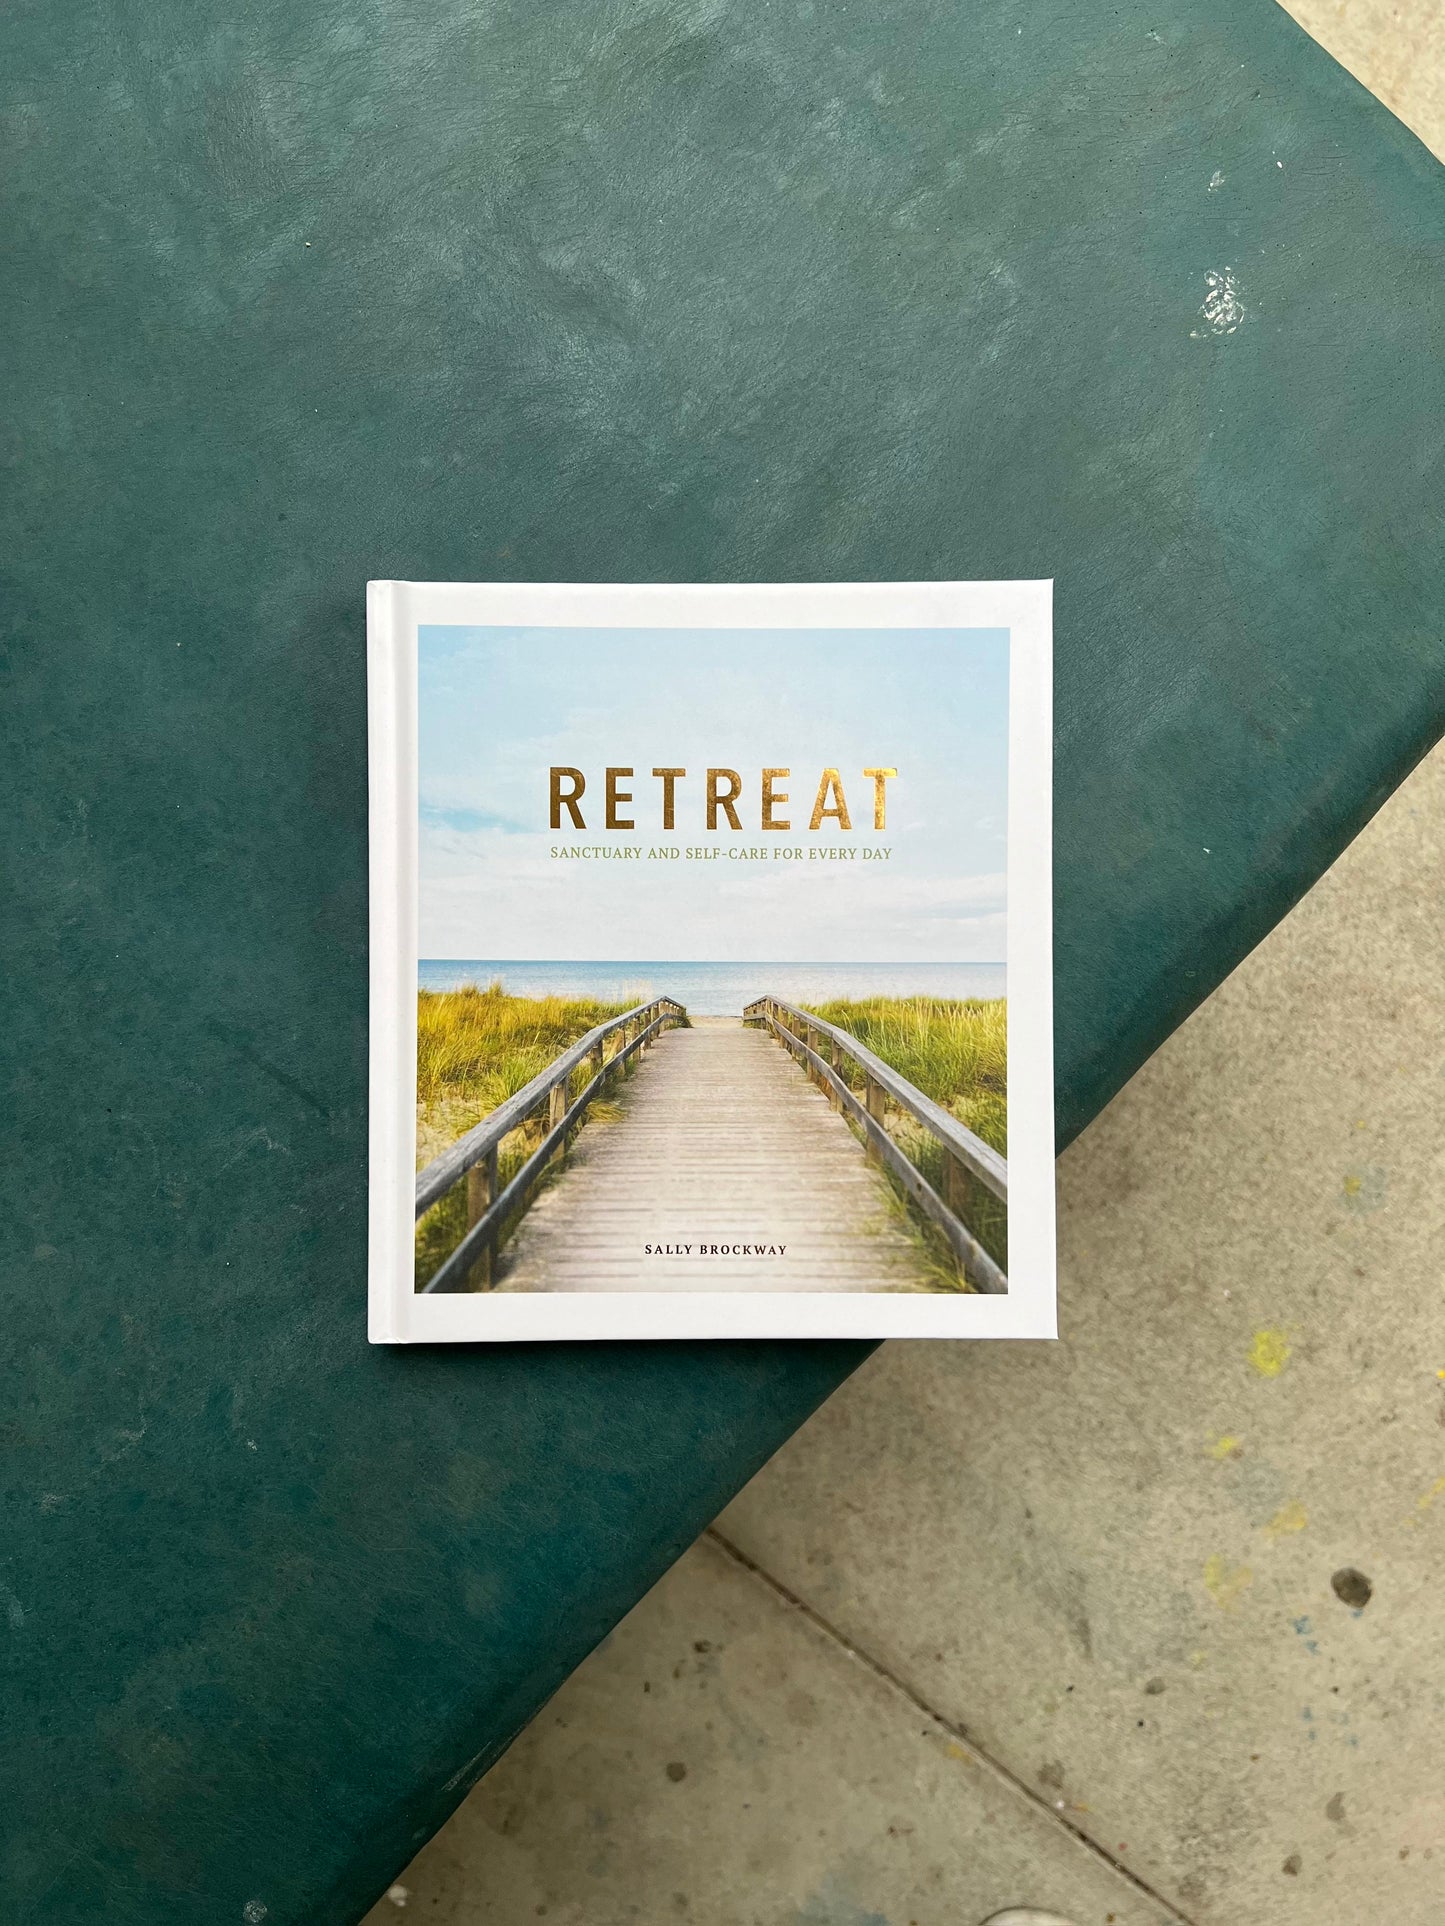 Retreat: Sanctuary and Self-Care for Every Day